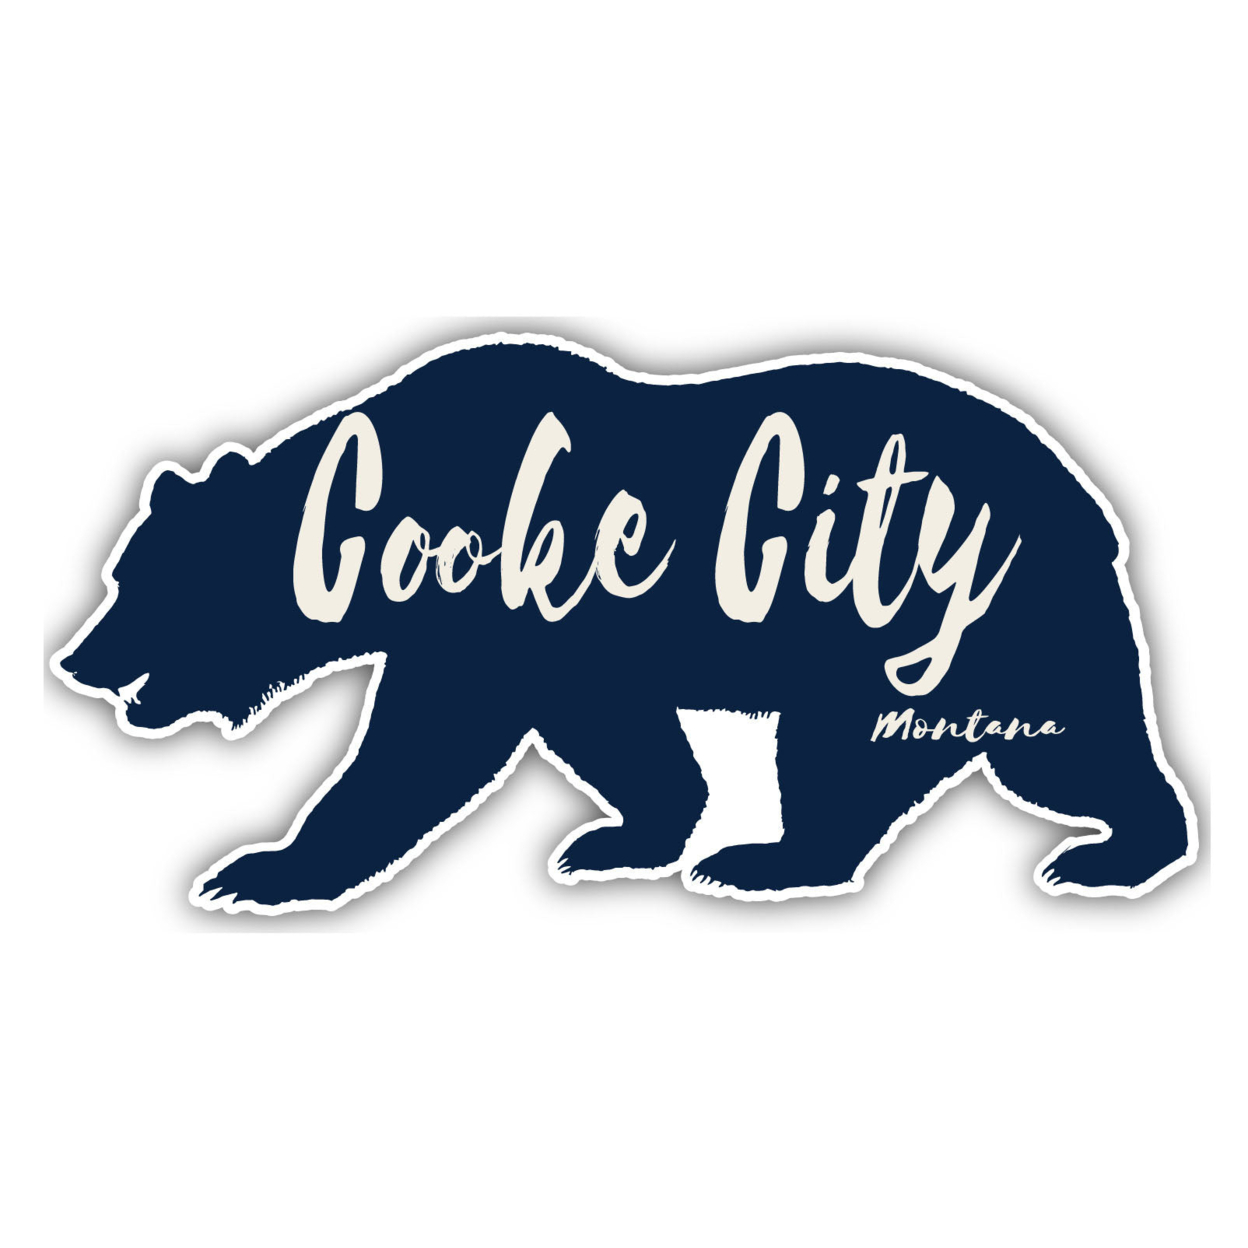 Cooke City Montana Souvenir Decorative Stickers (Choose Theme And Size) - 4-Pack, 2-Inch, Great Outdoors